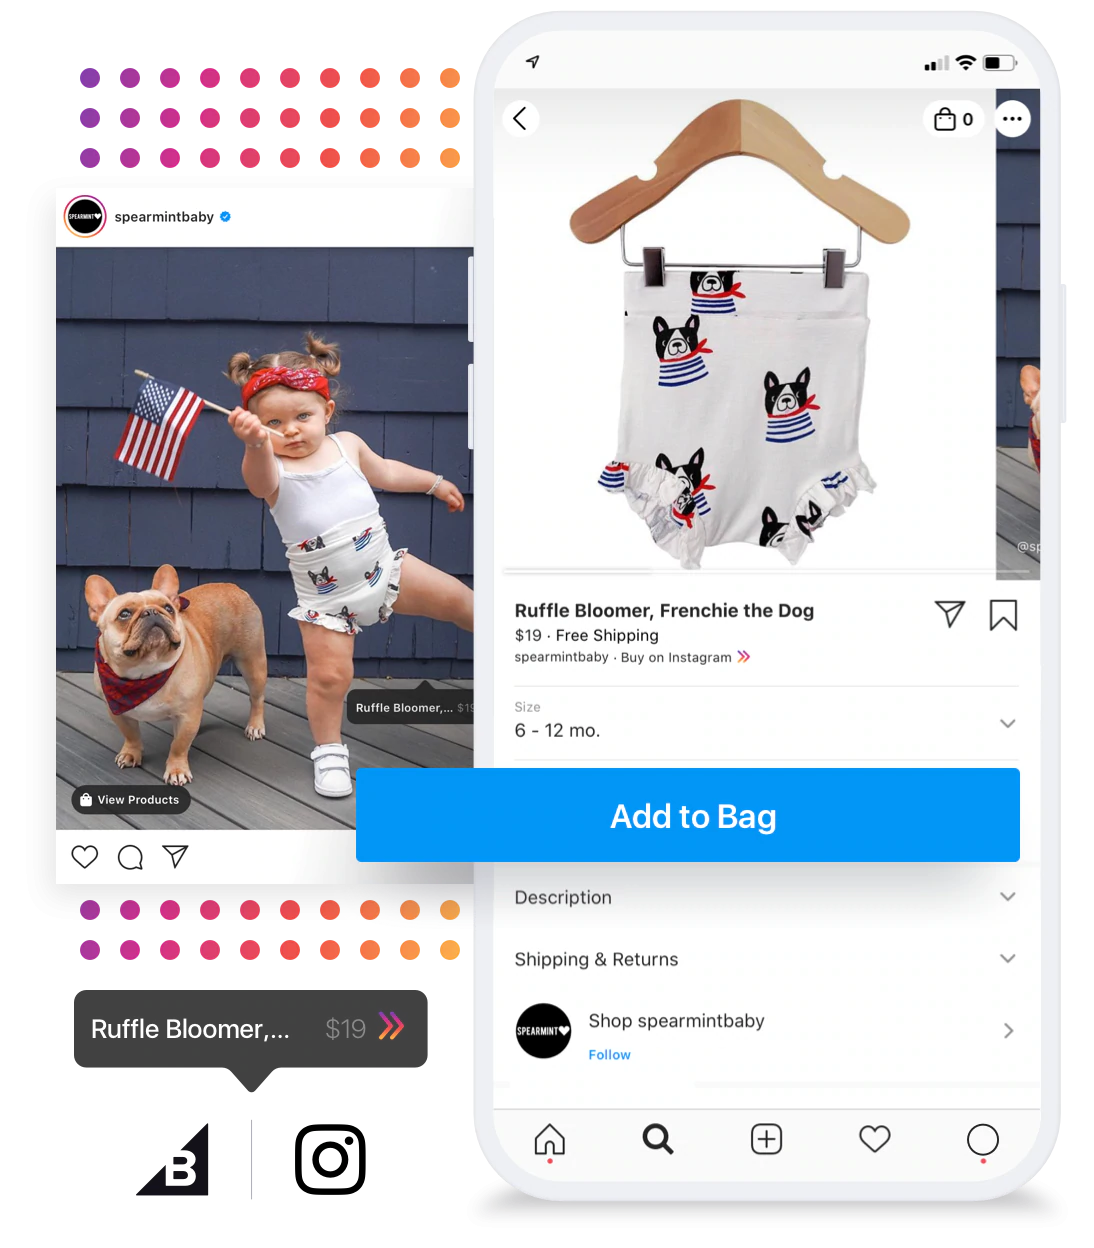 BigCommerce has released a Facebook Commerce Manager integration to allow ecommerce sales directly on Instagram